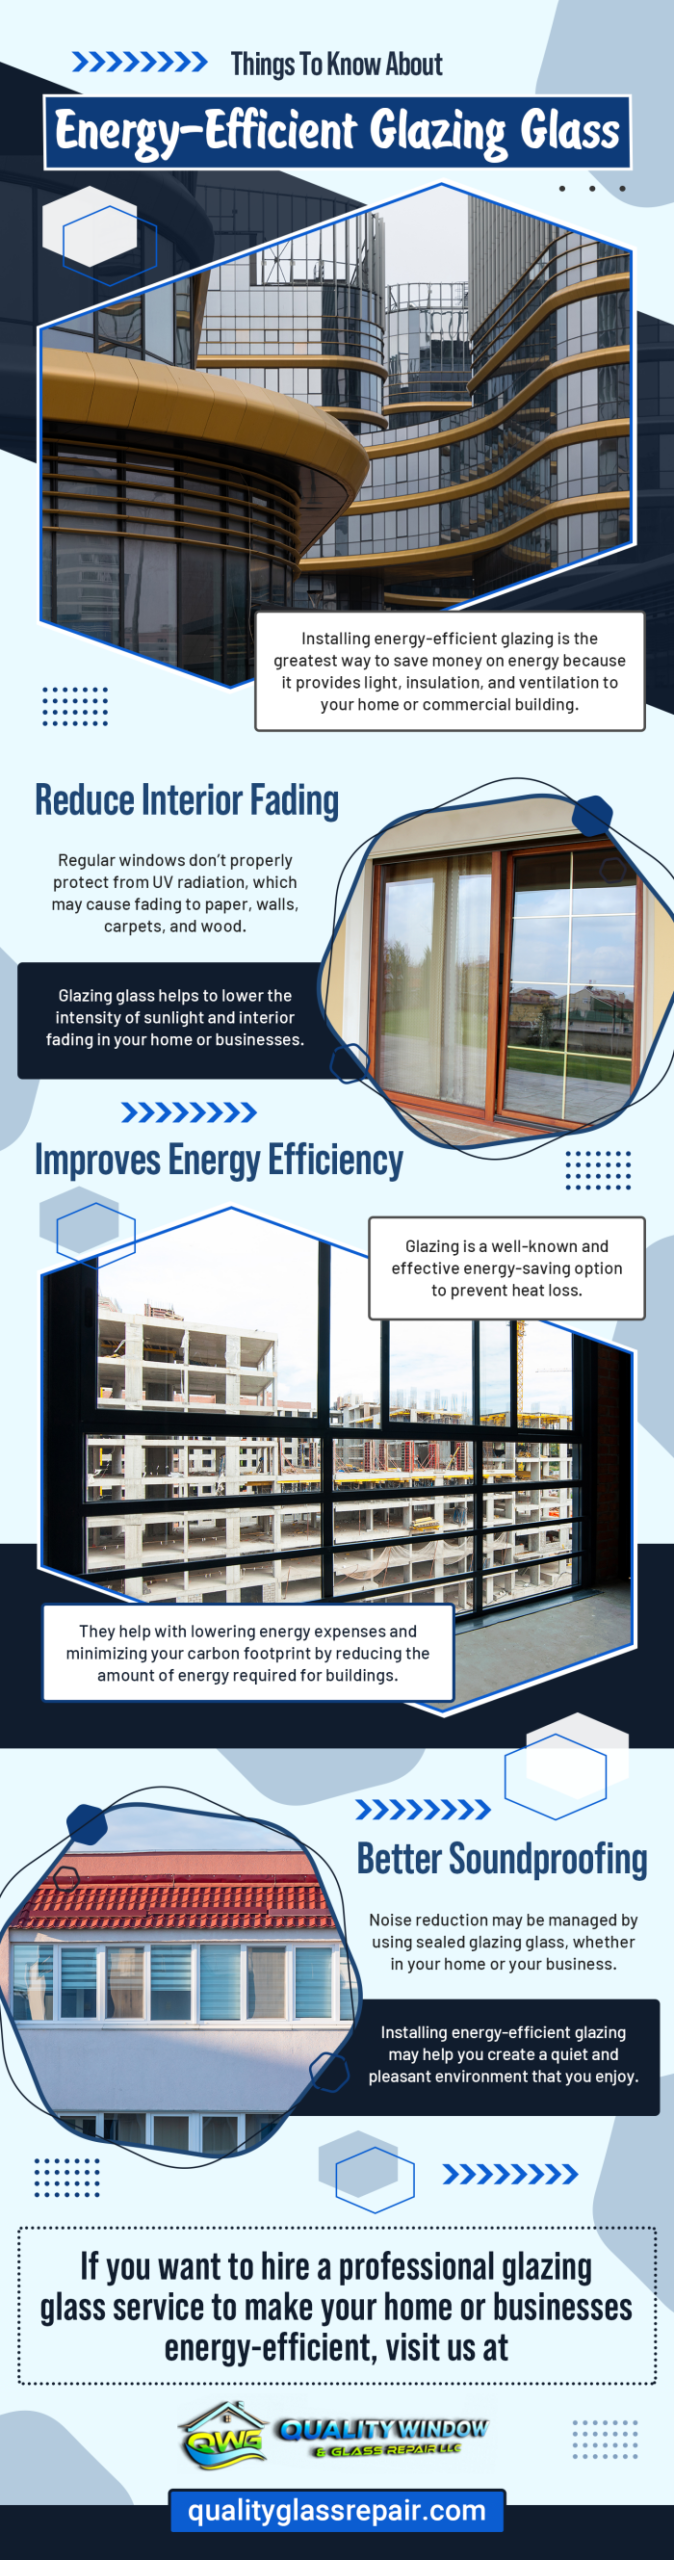 Things to Know About Energy Efficient Glazing Glass